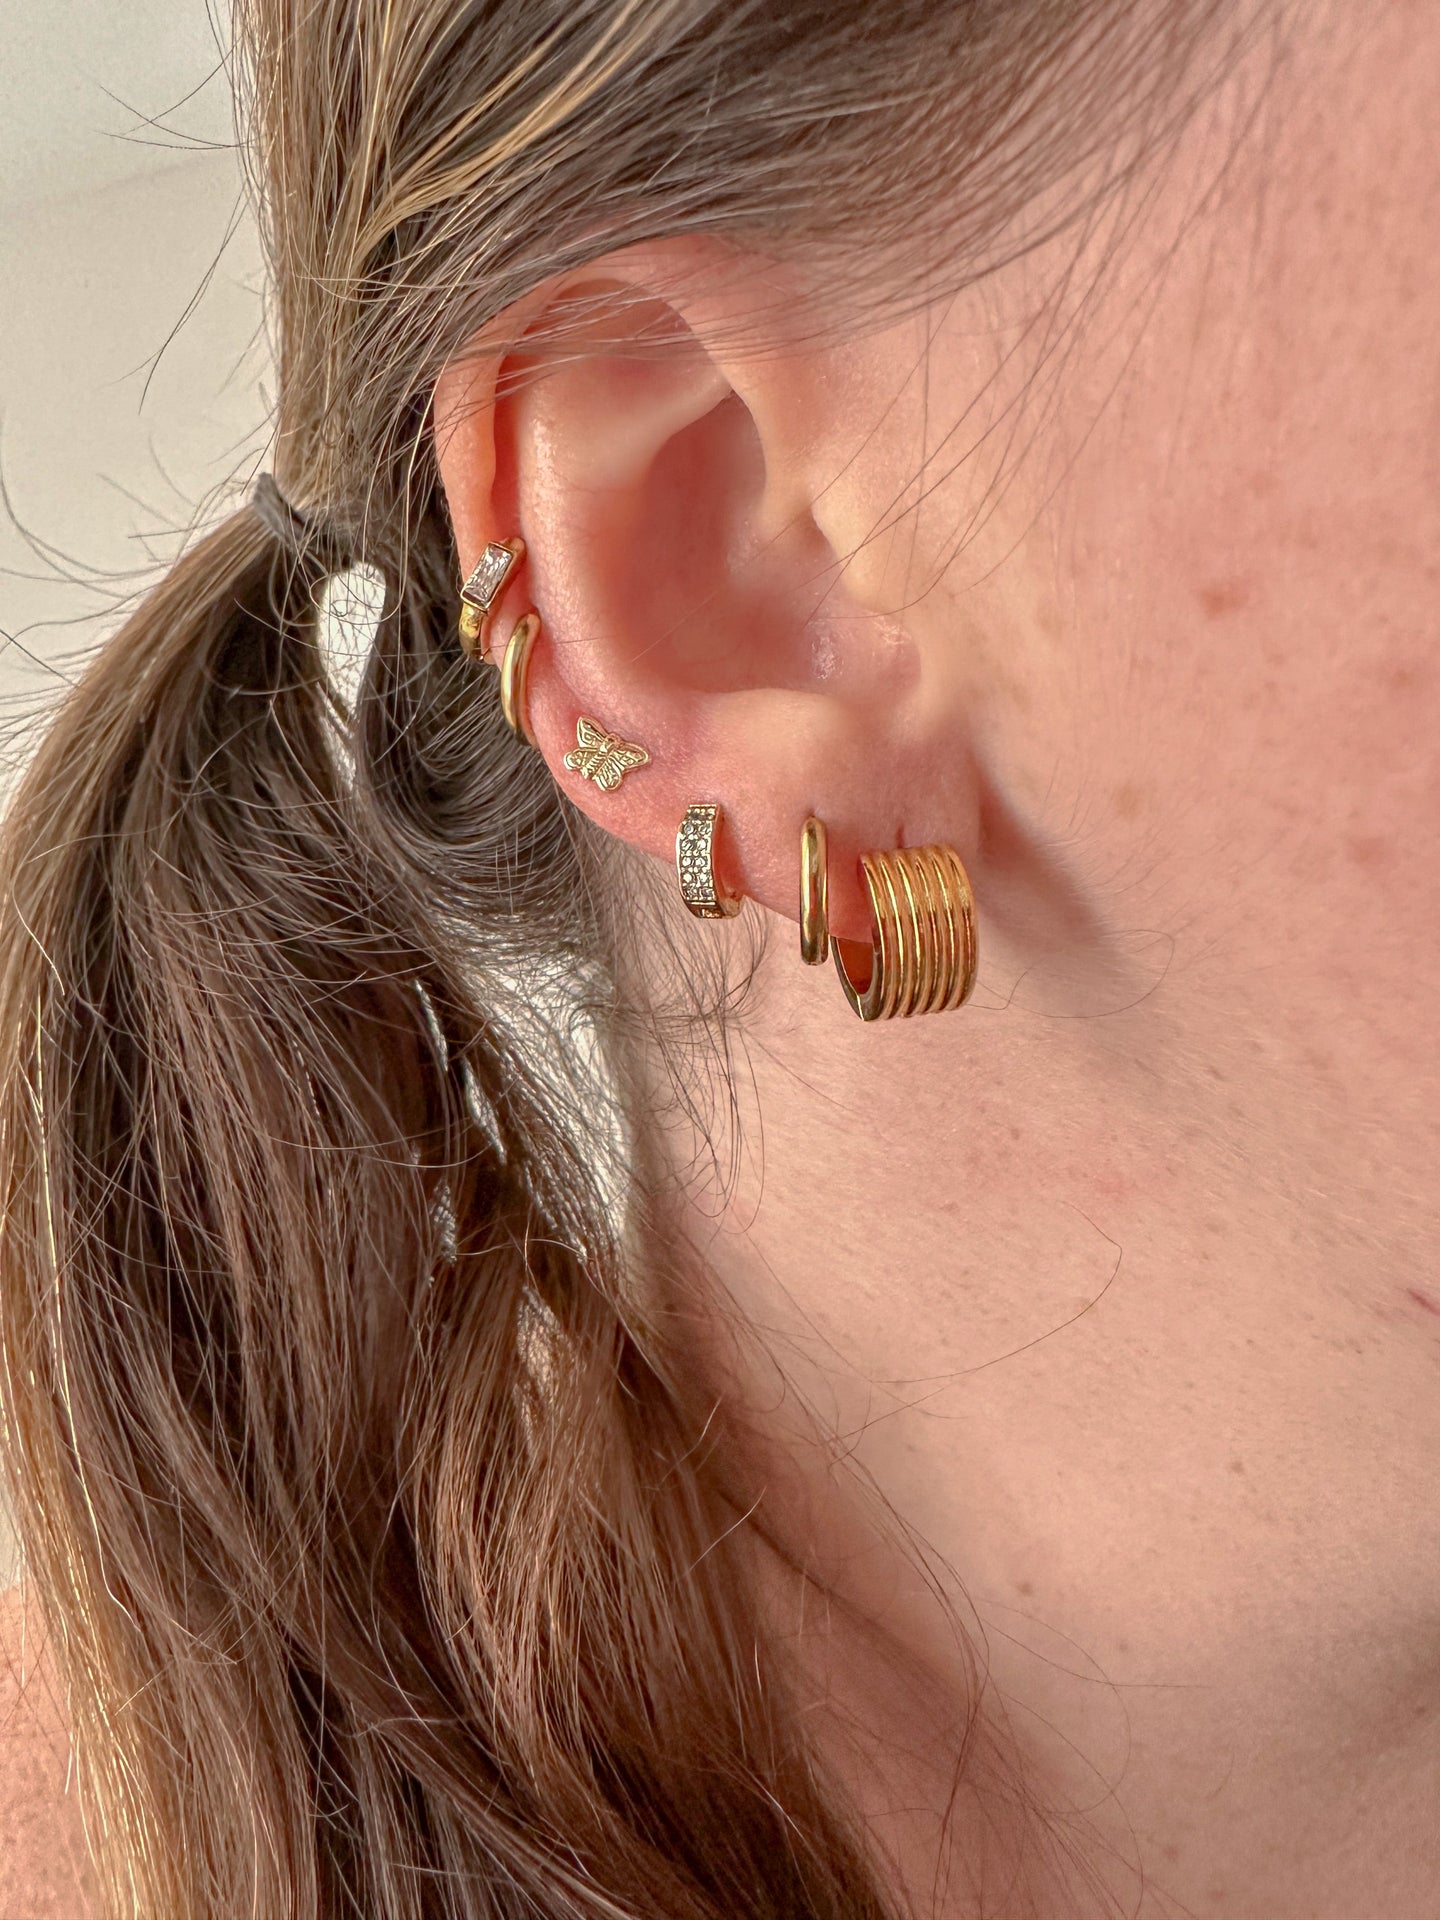 DRIP JEWELRY Subscription: EARRINGS OF THE MONTH